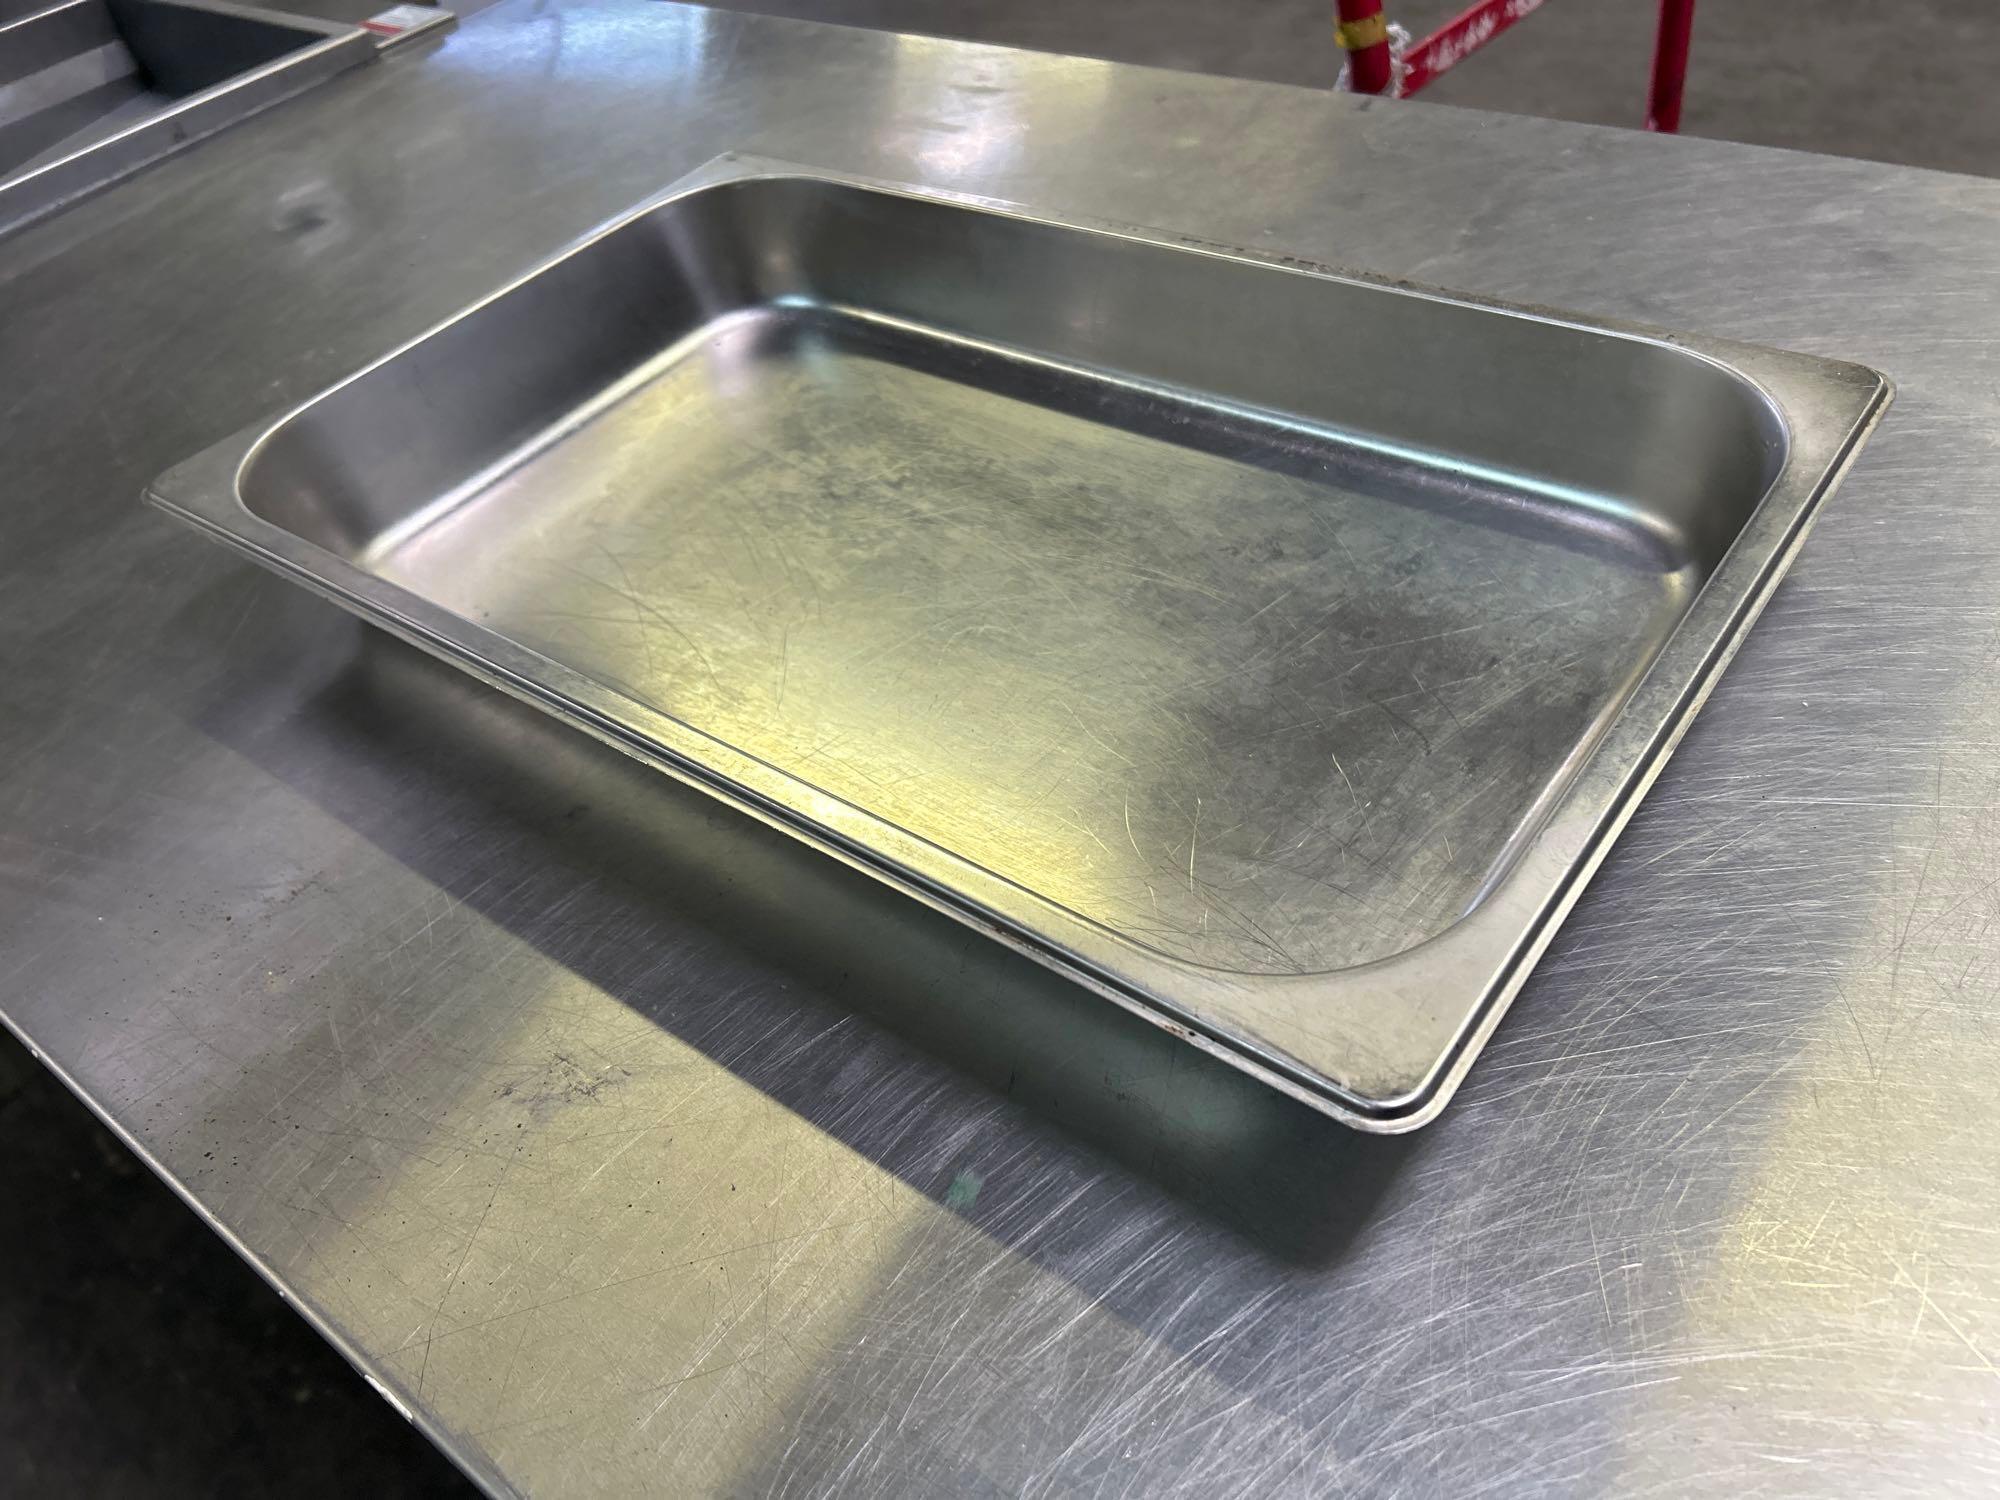 Full Size x 2 in. Stainless Steel Pans